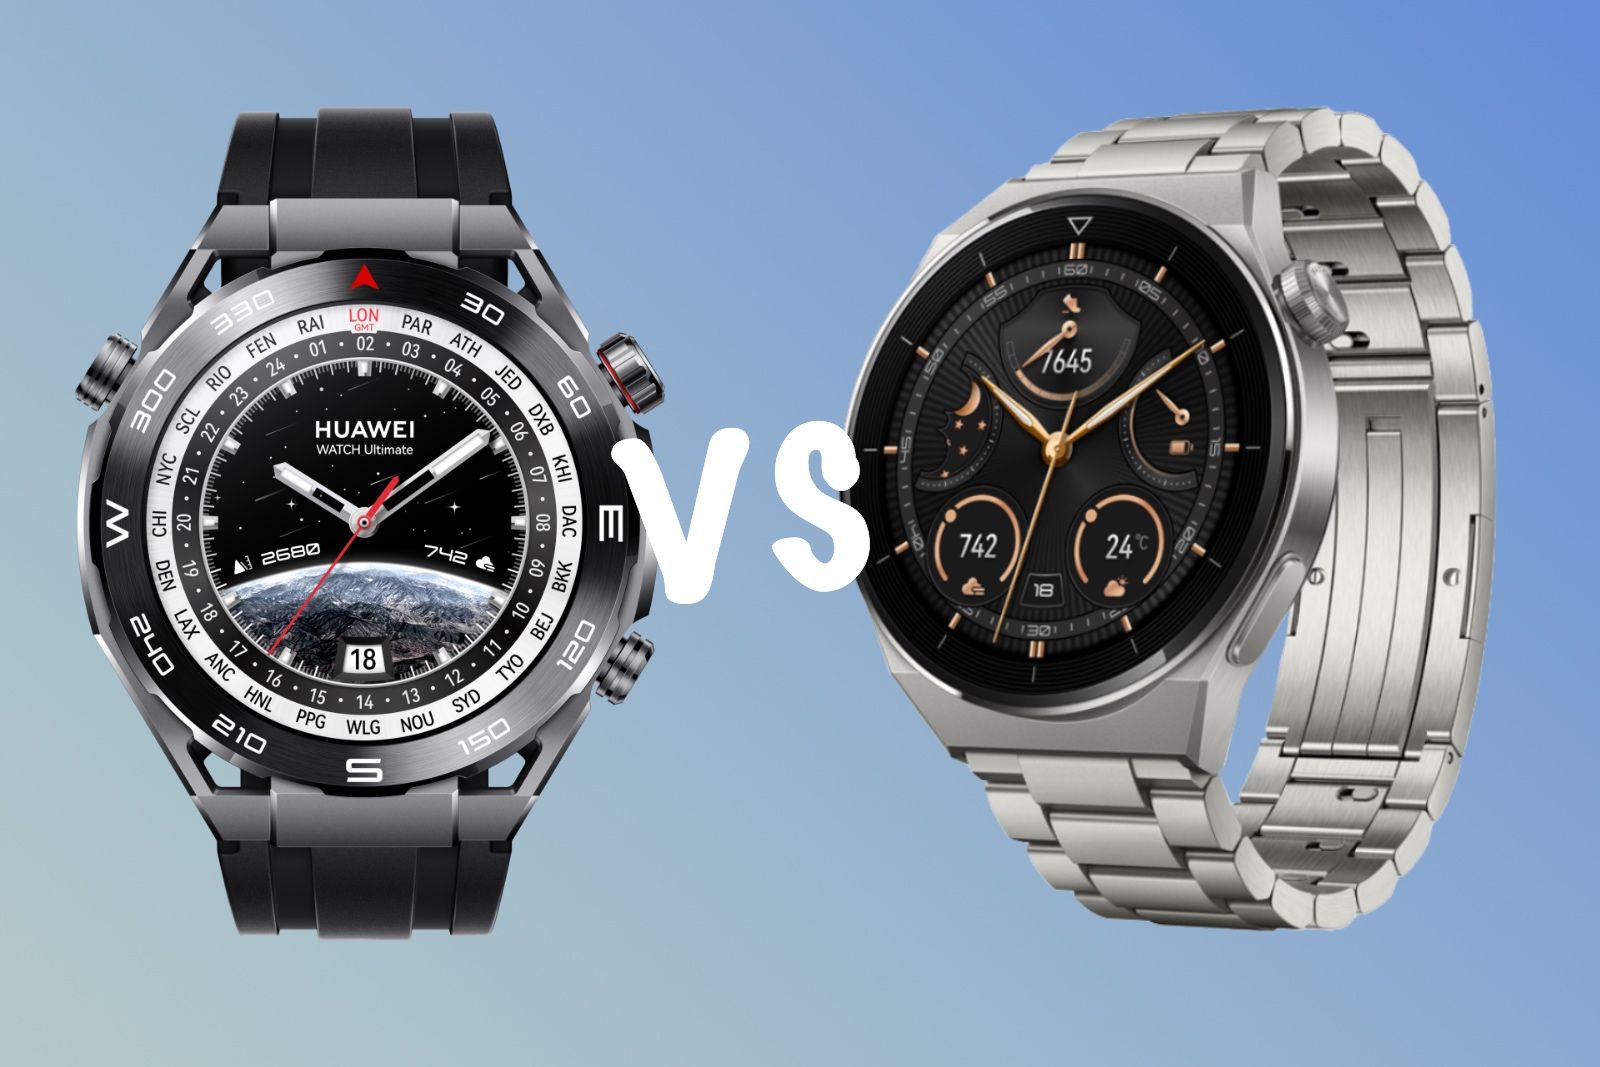 Huawei Watch Ultimate vs Huawei Watch GT 3 Pro: What’s the difference?